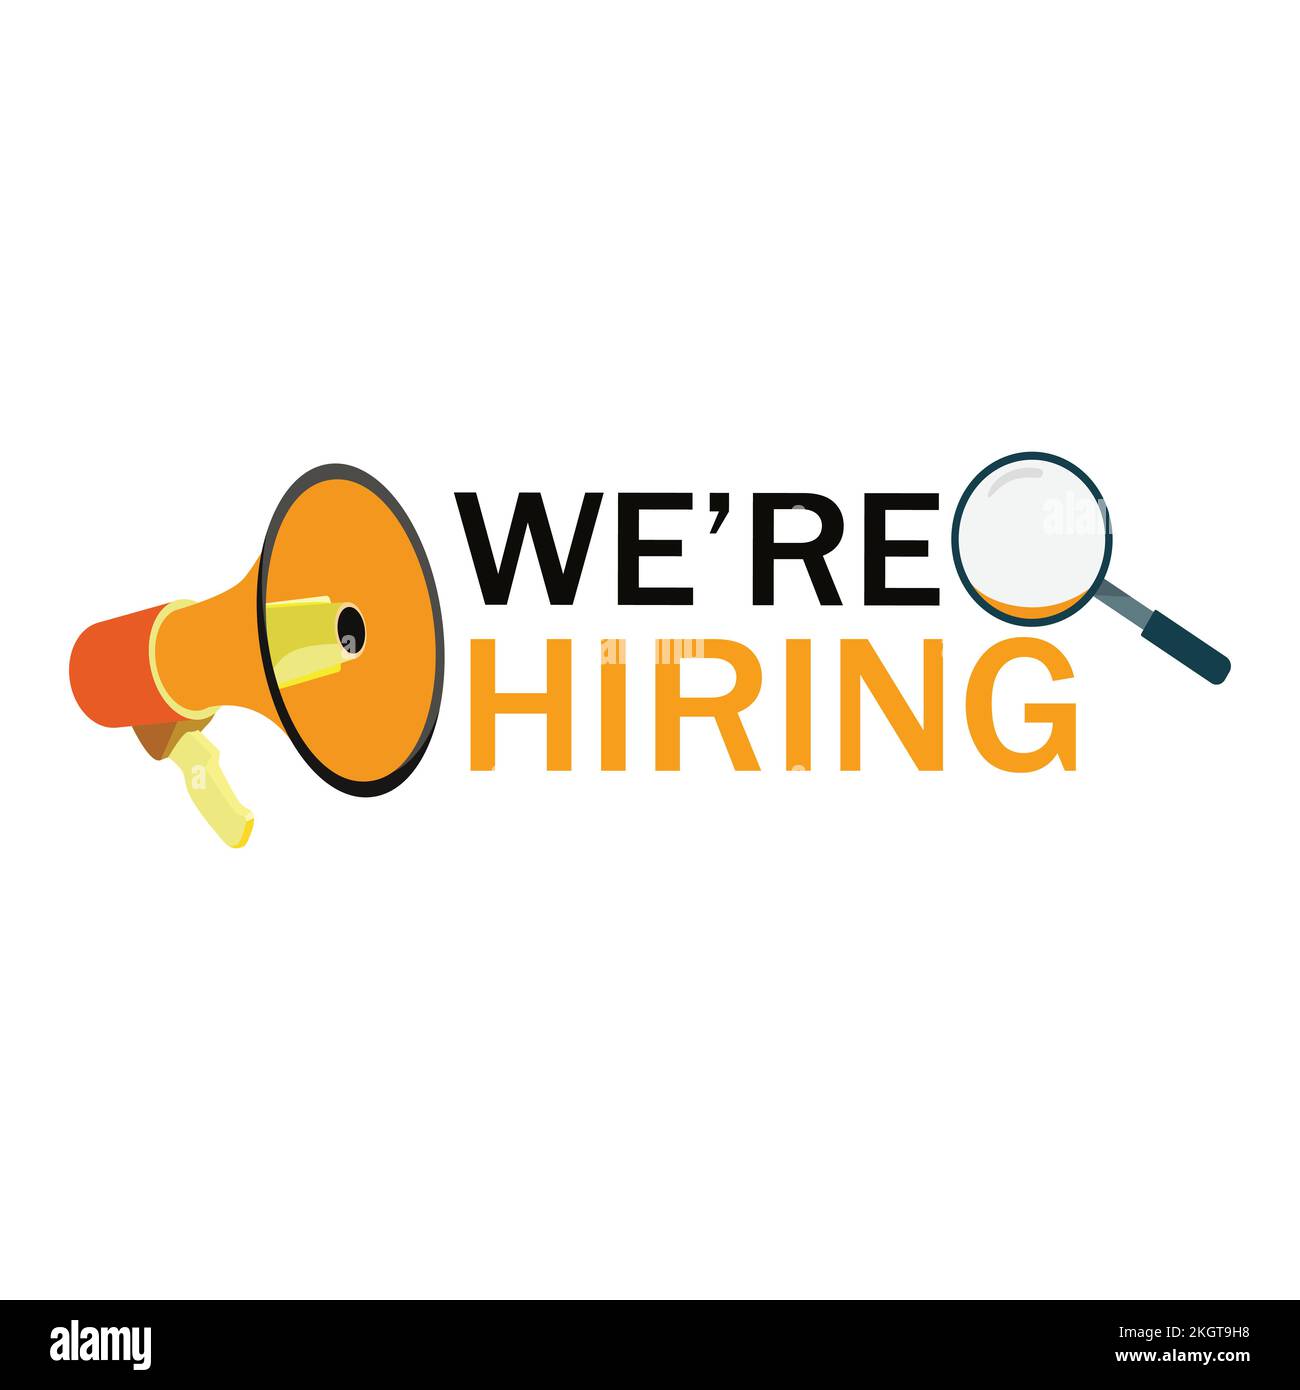 We are hiring vector design with black font design on white background with mike speaker and magnifying glass design. Business recruiting concept with Stock Vector